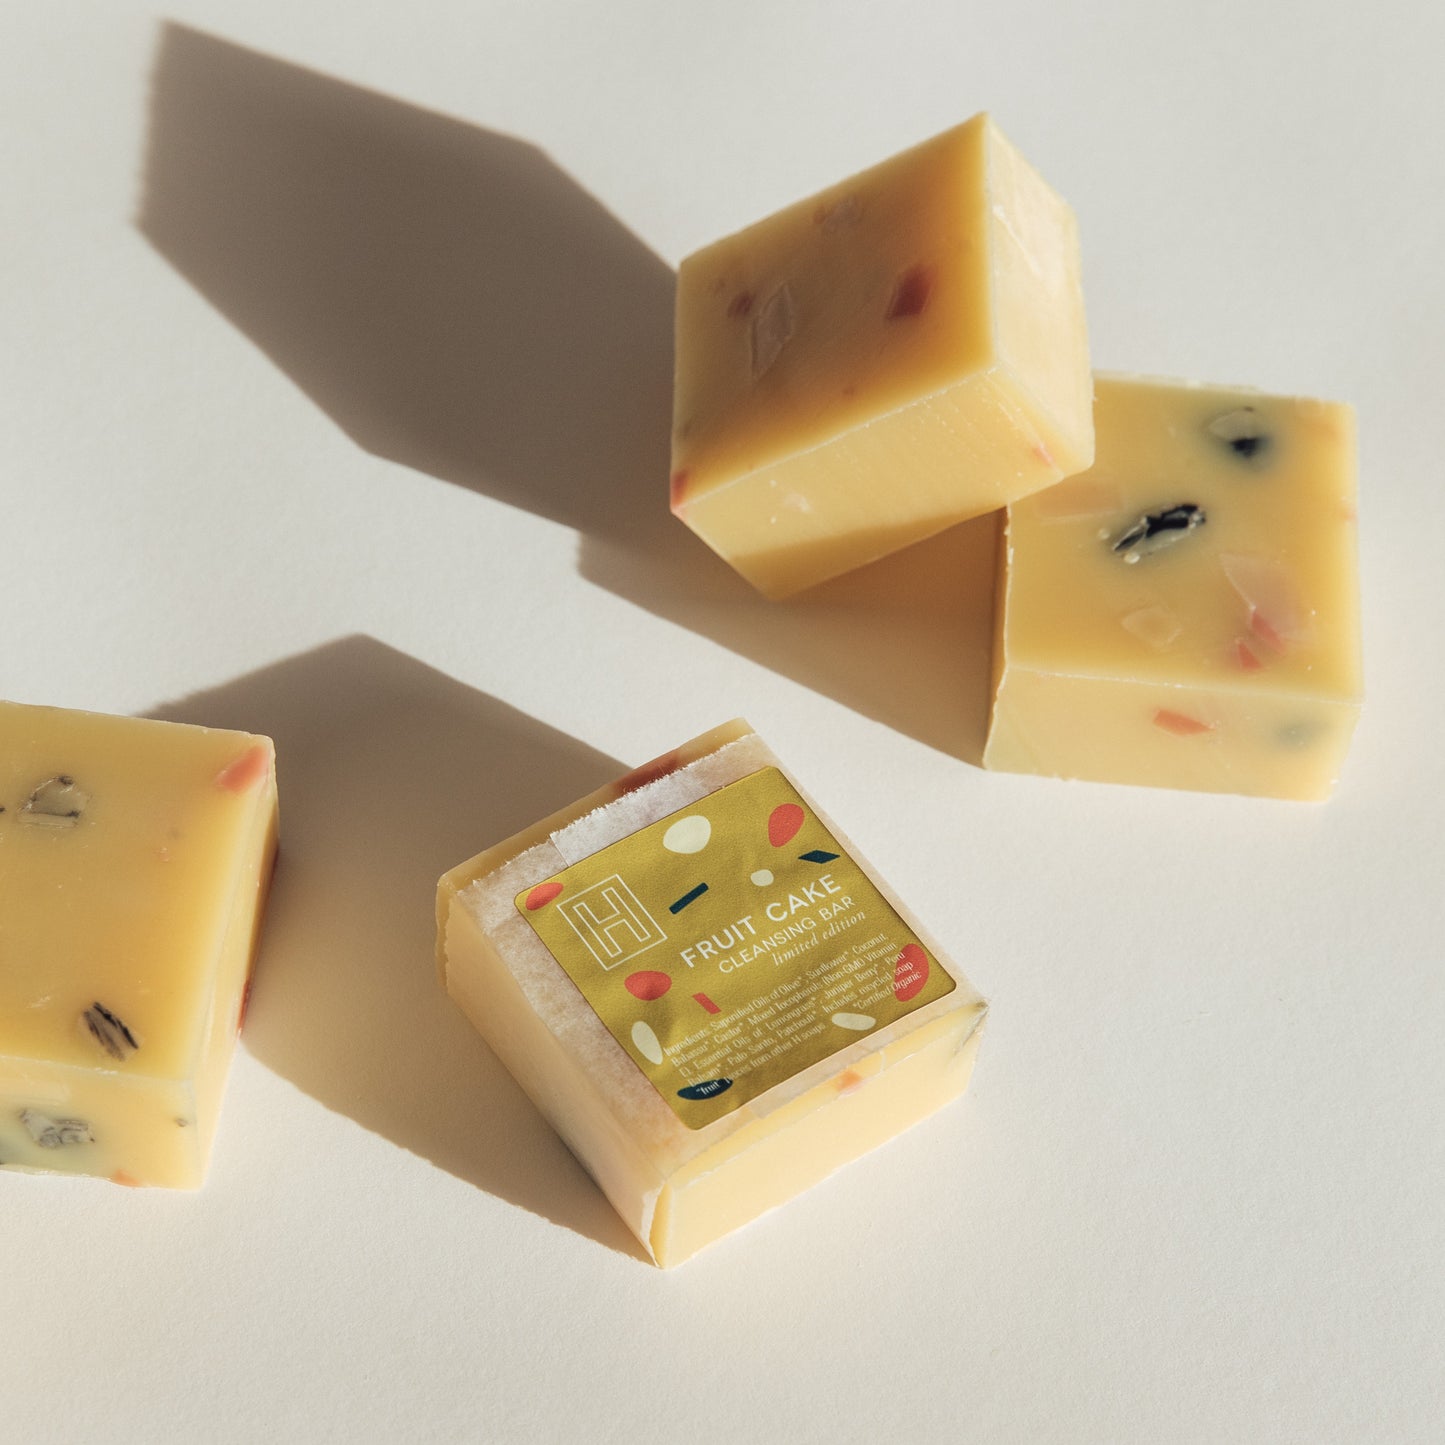 H IS FOR LOVE Fruit Cake Cleansing Bar